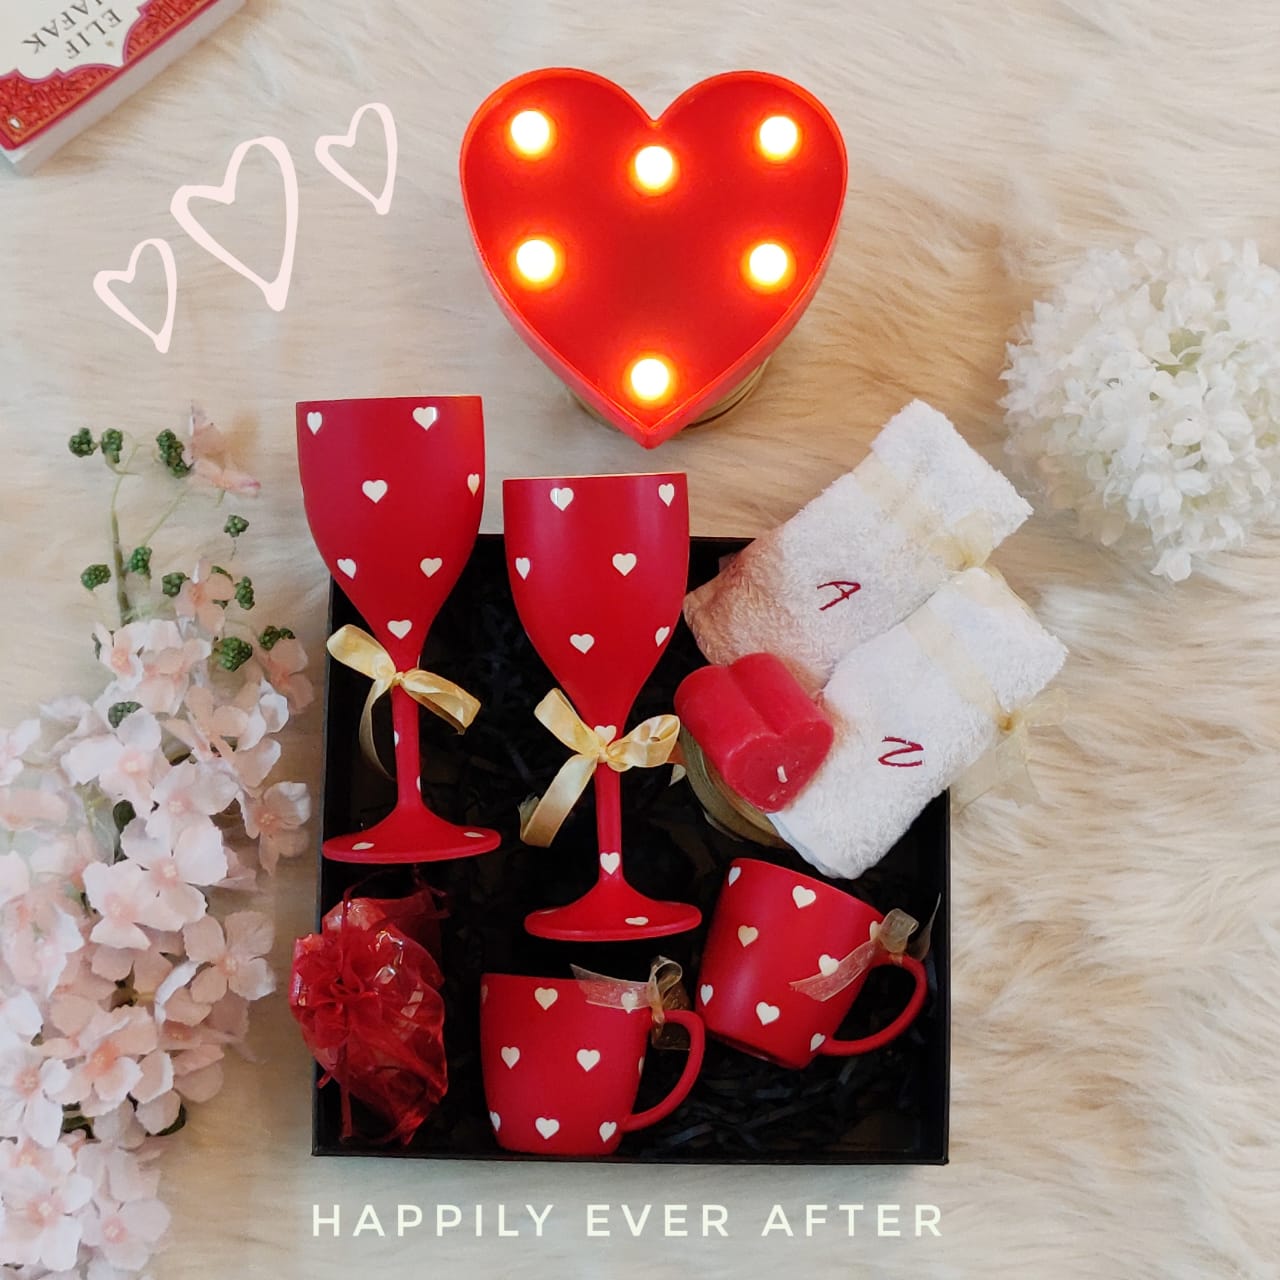 'Happily Ever After' Gift Box